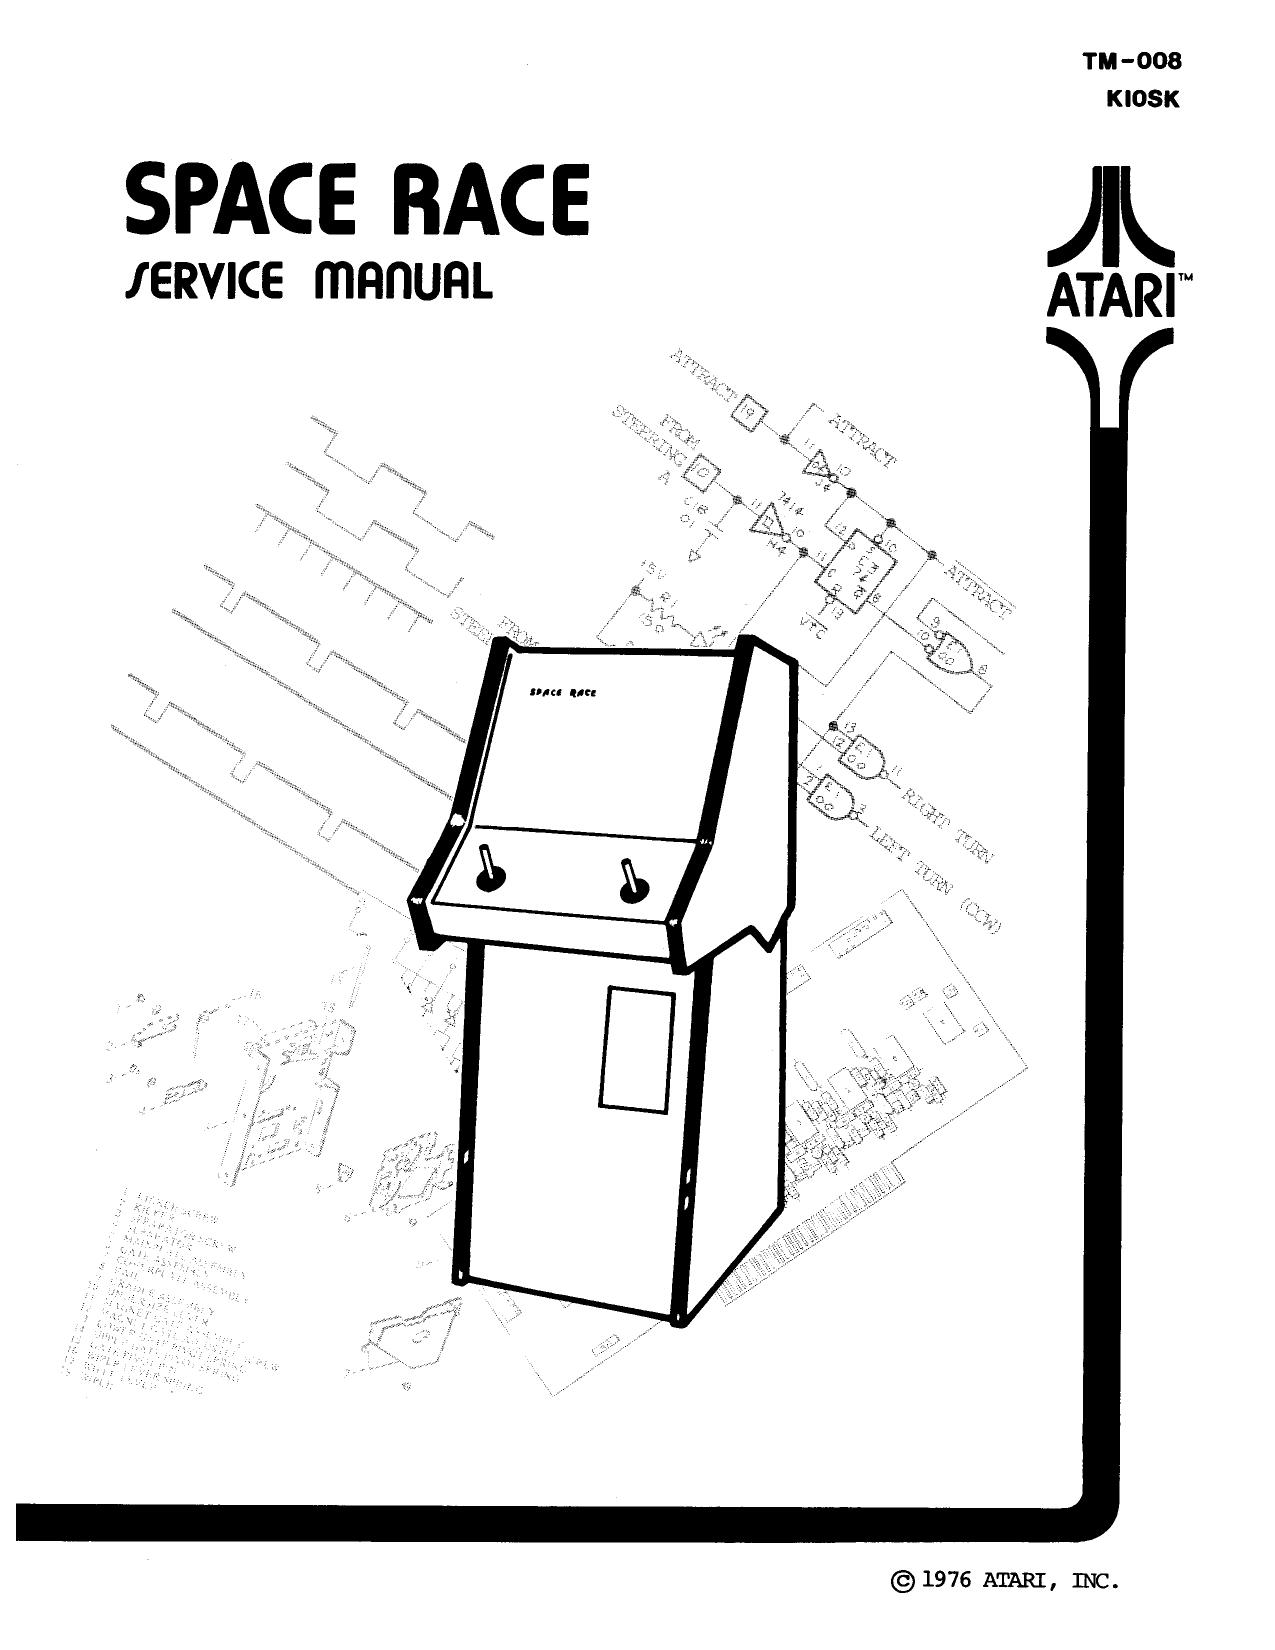 spacerace